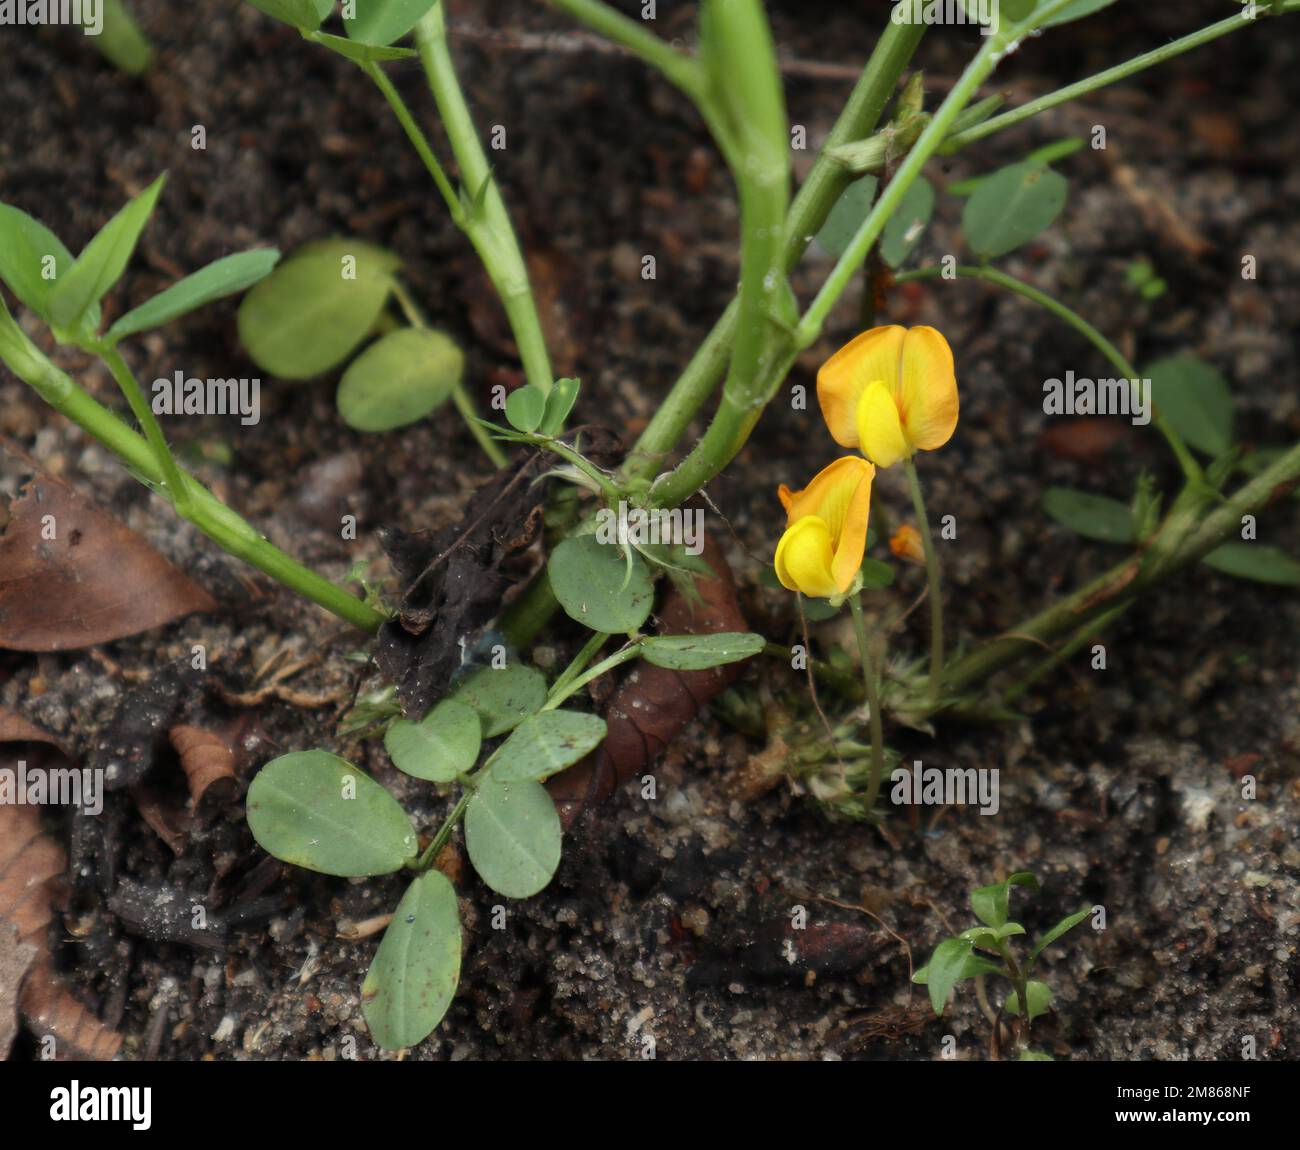 Close up of a lower portion of the Peanut plant (Arachis Hypogaea) with soil and two bloomed yellow color Peanut flowers Stock Photo